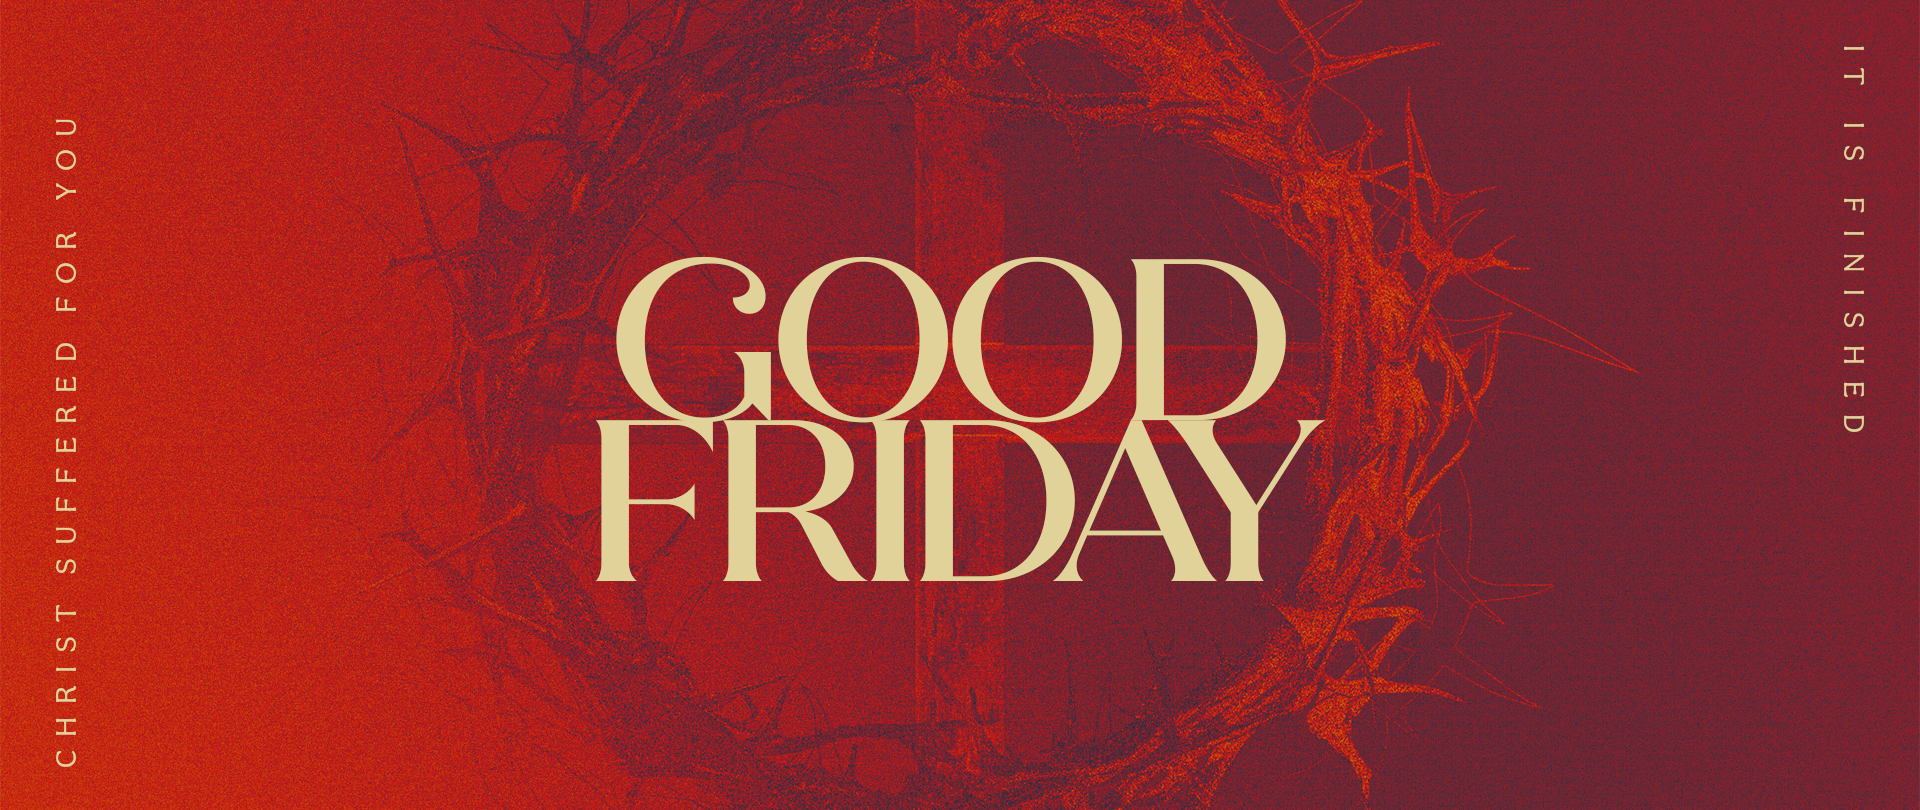 Good Friday Service
March 29 at 7:00 PM
